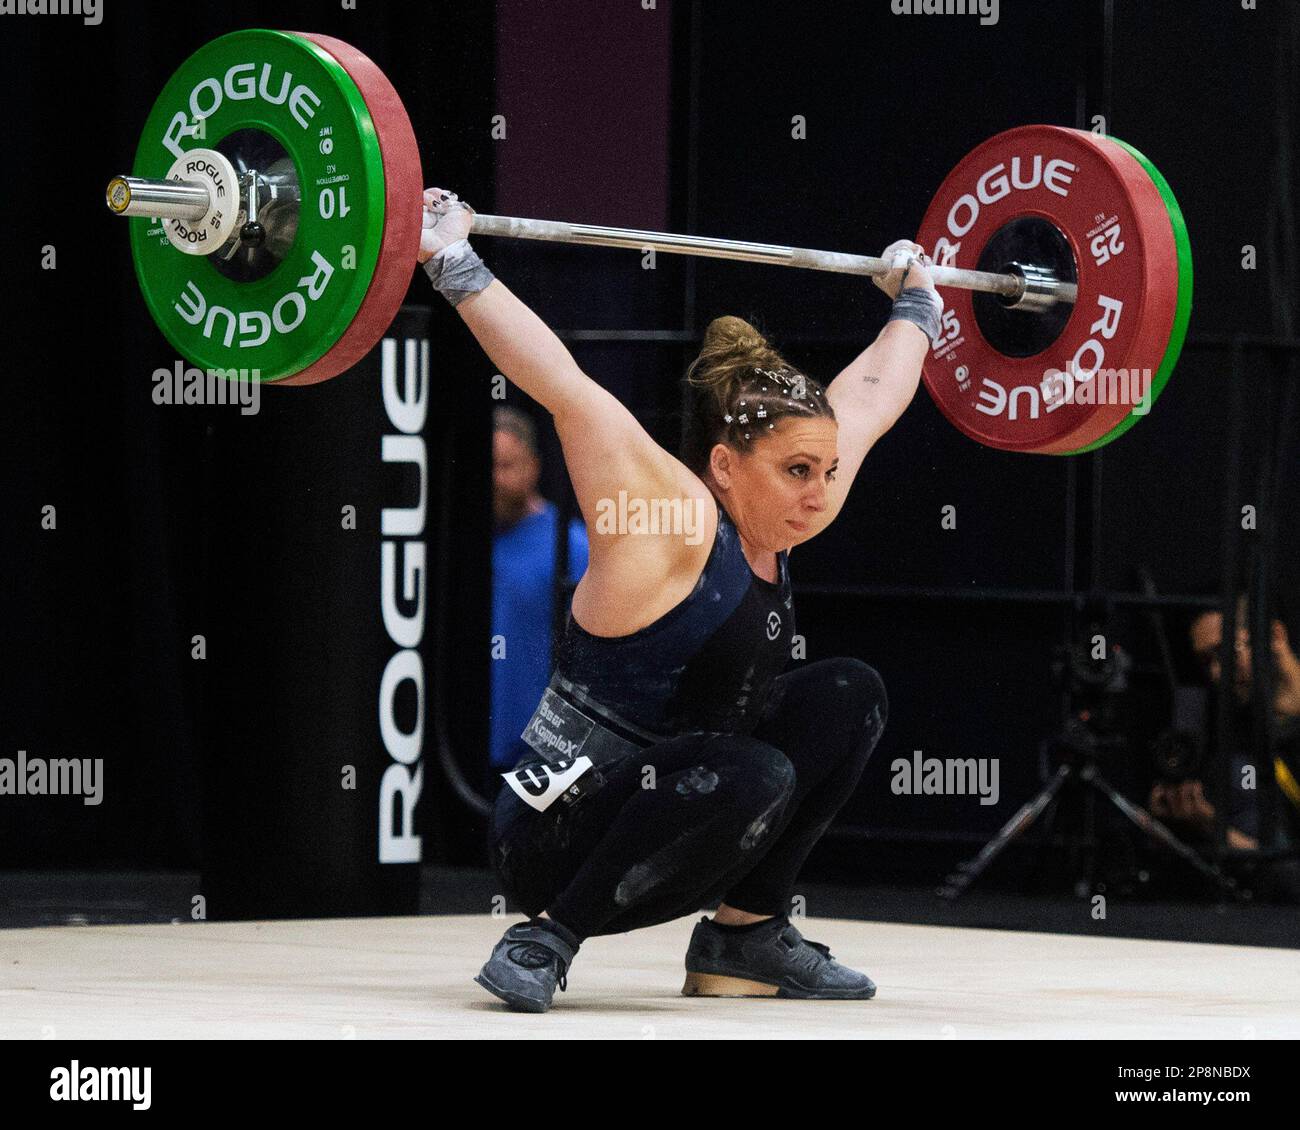 Columbus, Ohio, United States. 3th Mar, 2023. Shelby Pflug competes in the snatch in the Women's 64kg category at the Rogue Stage in Columbus, Ohio, USA. Credit: Brent Clark/Alamy Live News Stock Photo